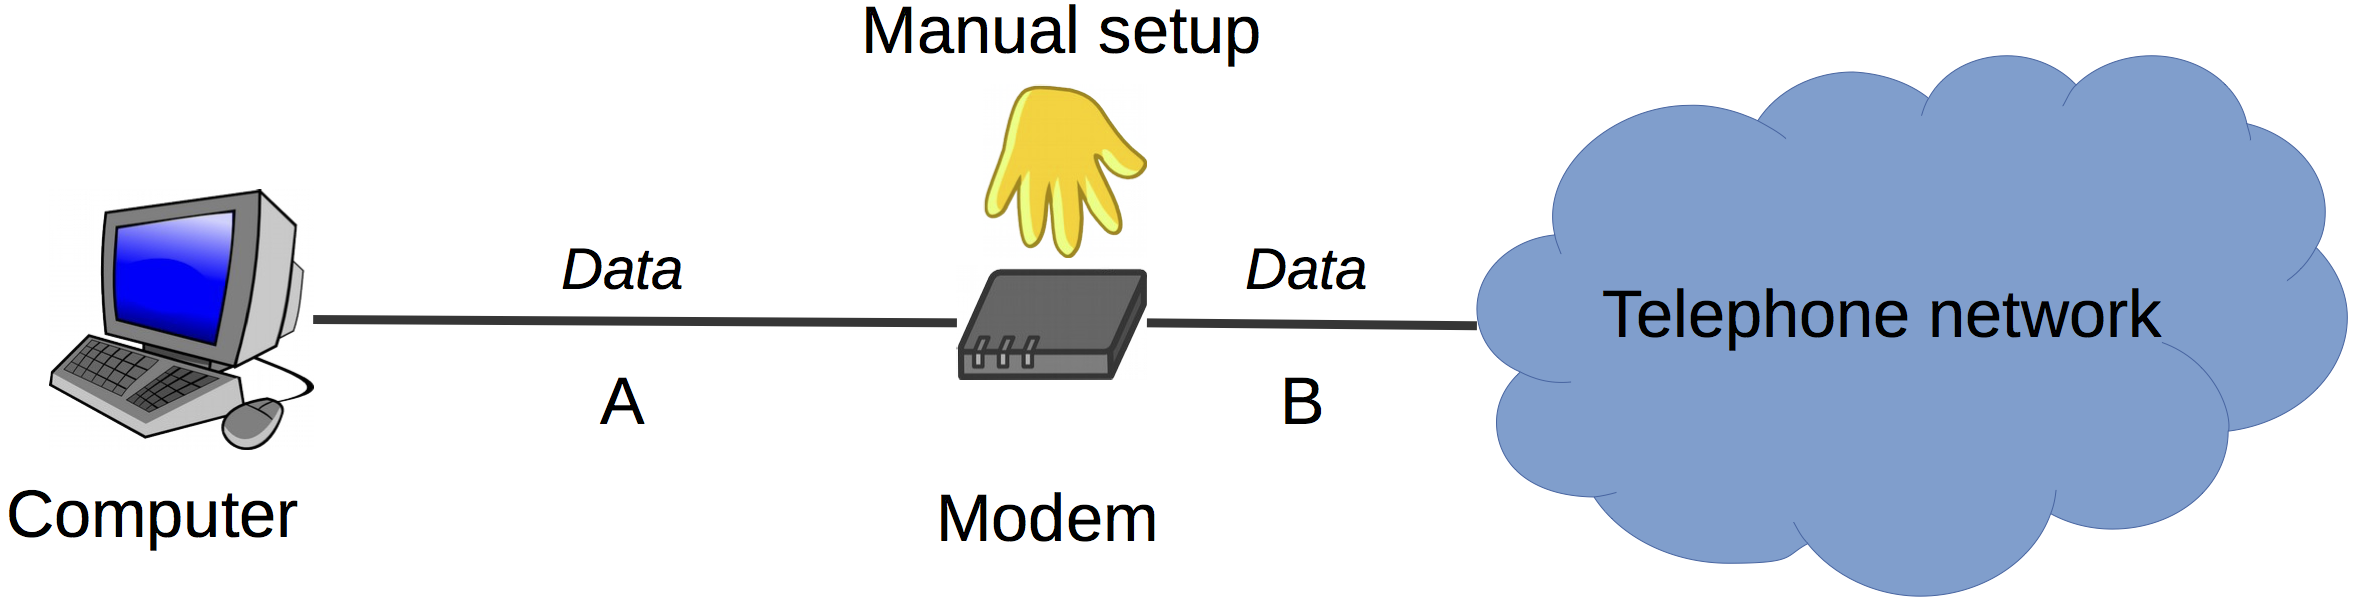 Manual modem configuration before the introduction of AT commands